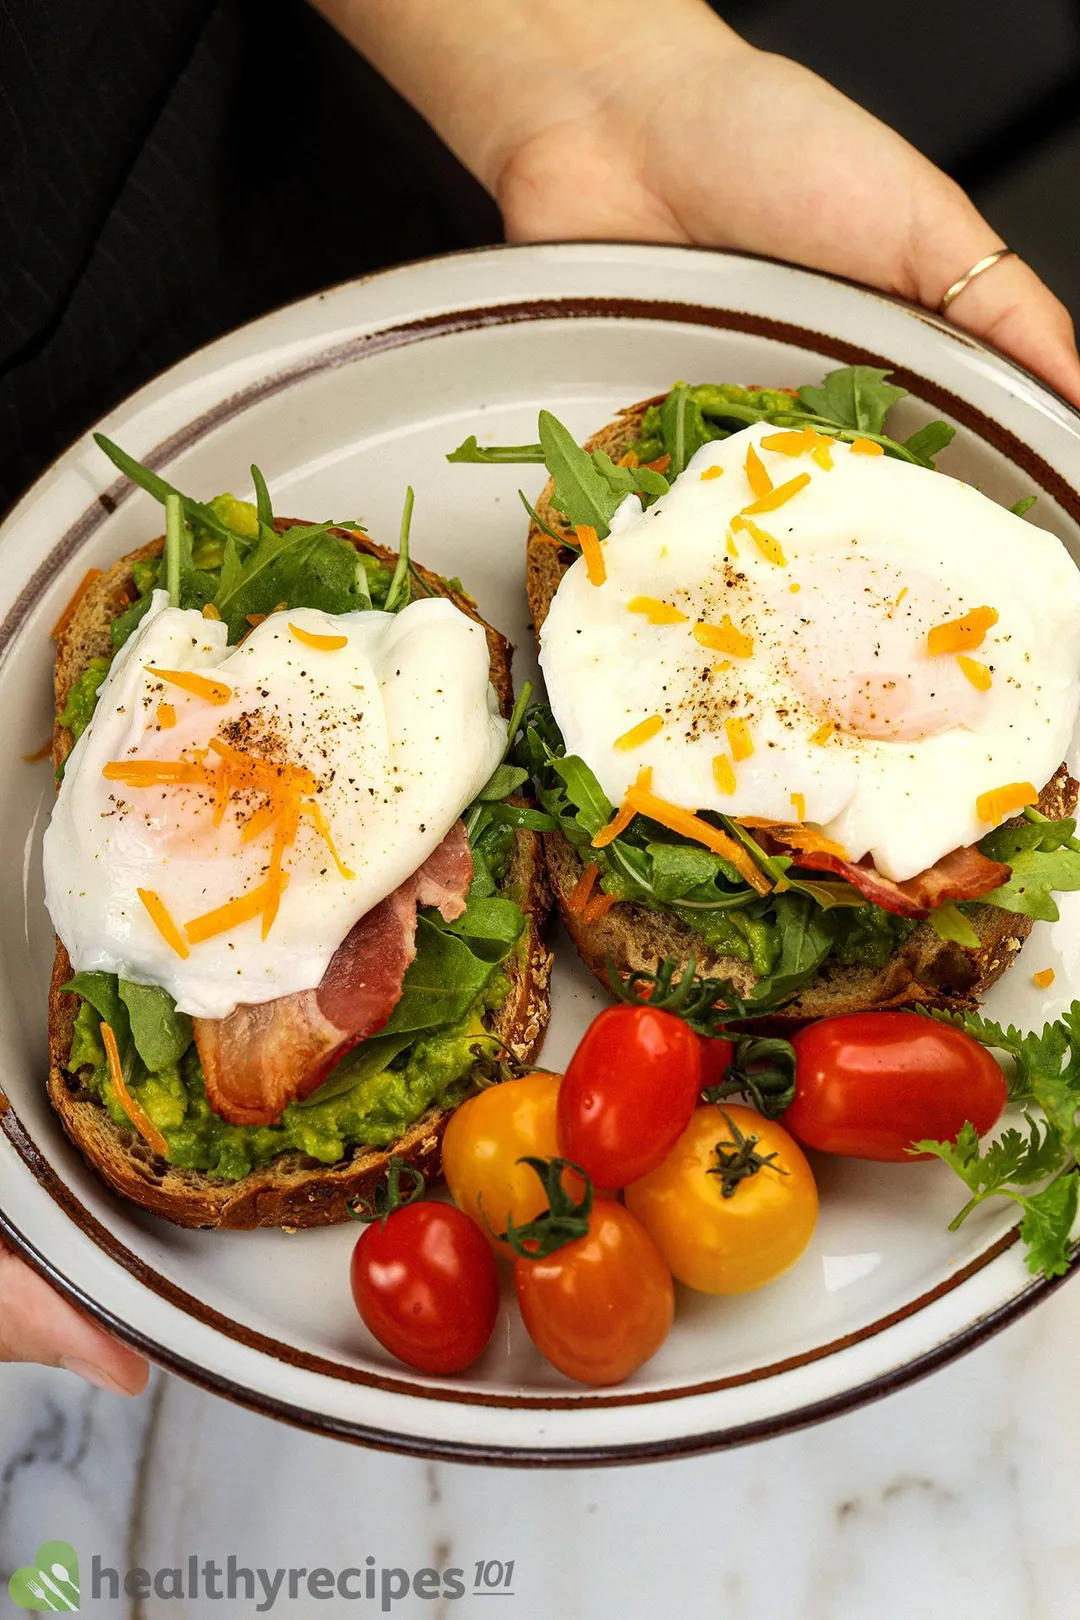 a hand holding a plate with two poached egg on bread decorated by cherry tomatoes